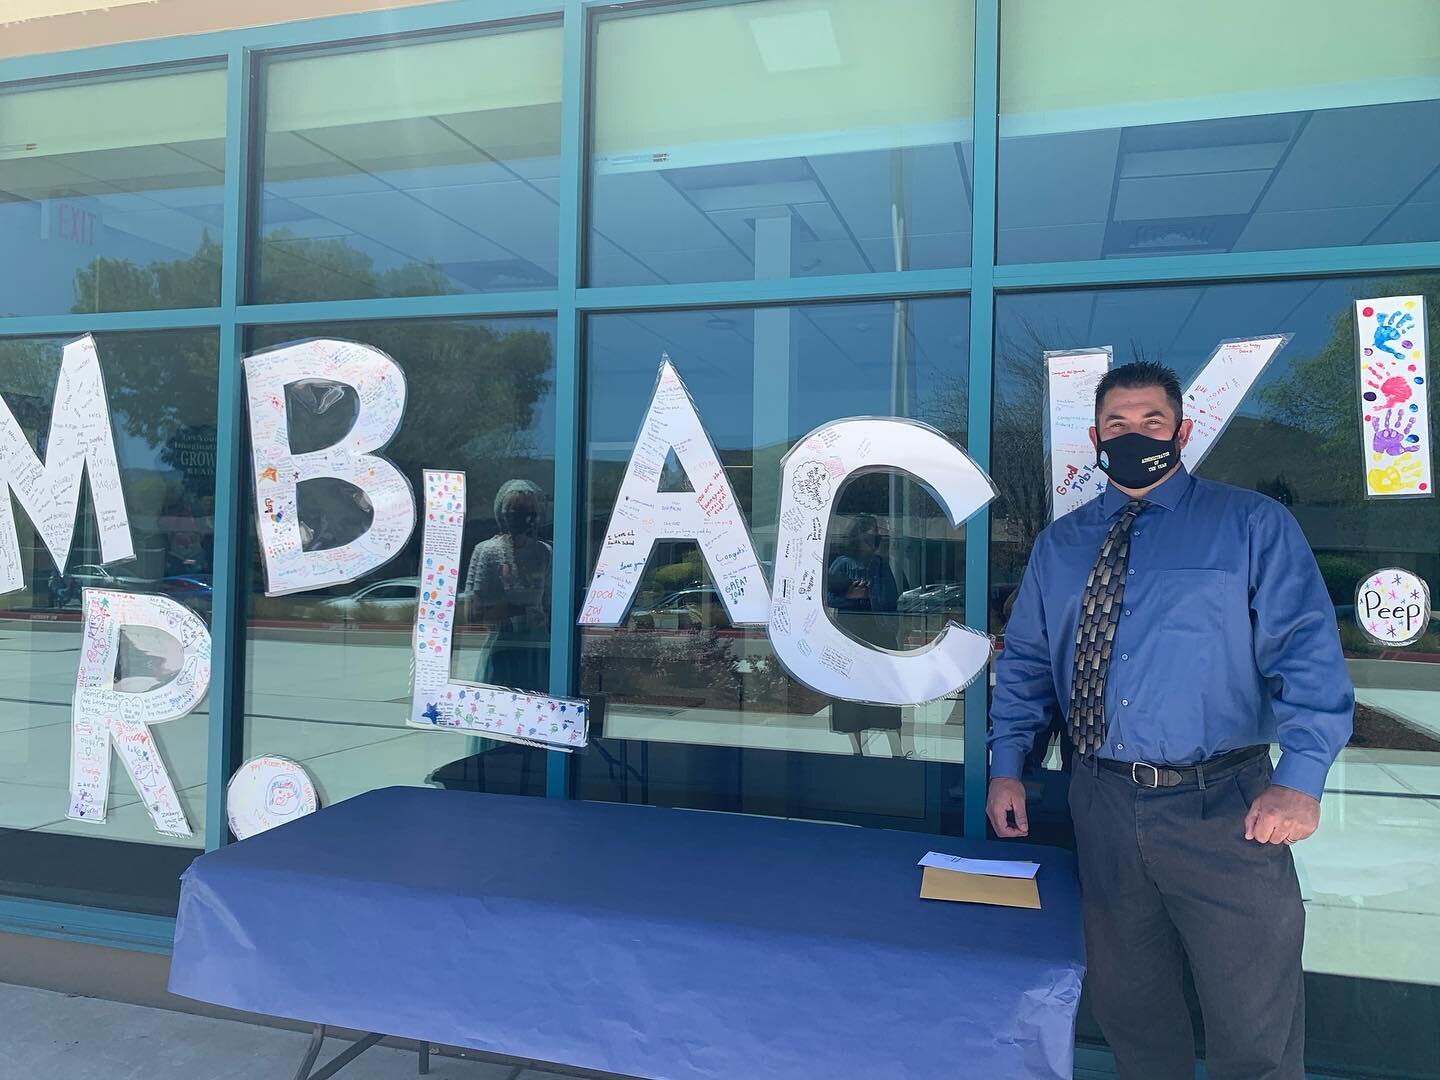 We have the most amazing Principal and today our district recognized
what the whole CL Smith Community has always known.  We are thrilled
to share that Mr. Black has been awarded the 2020-2021 Administrator
of the Year!!

Mr. Black, thank you for mak